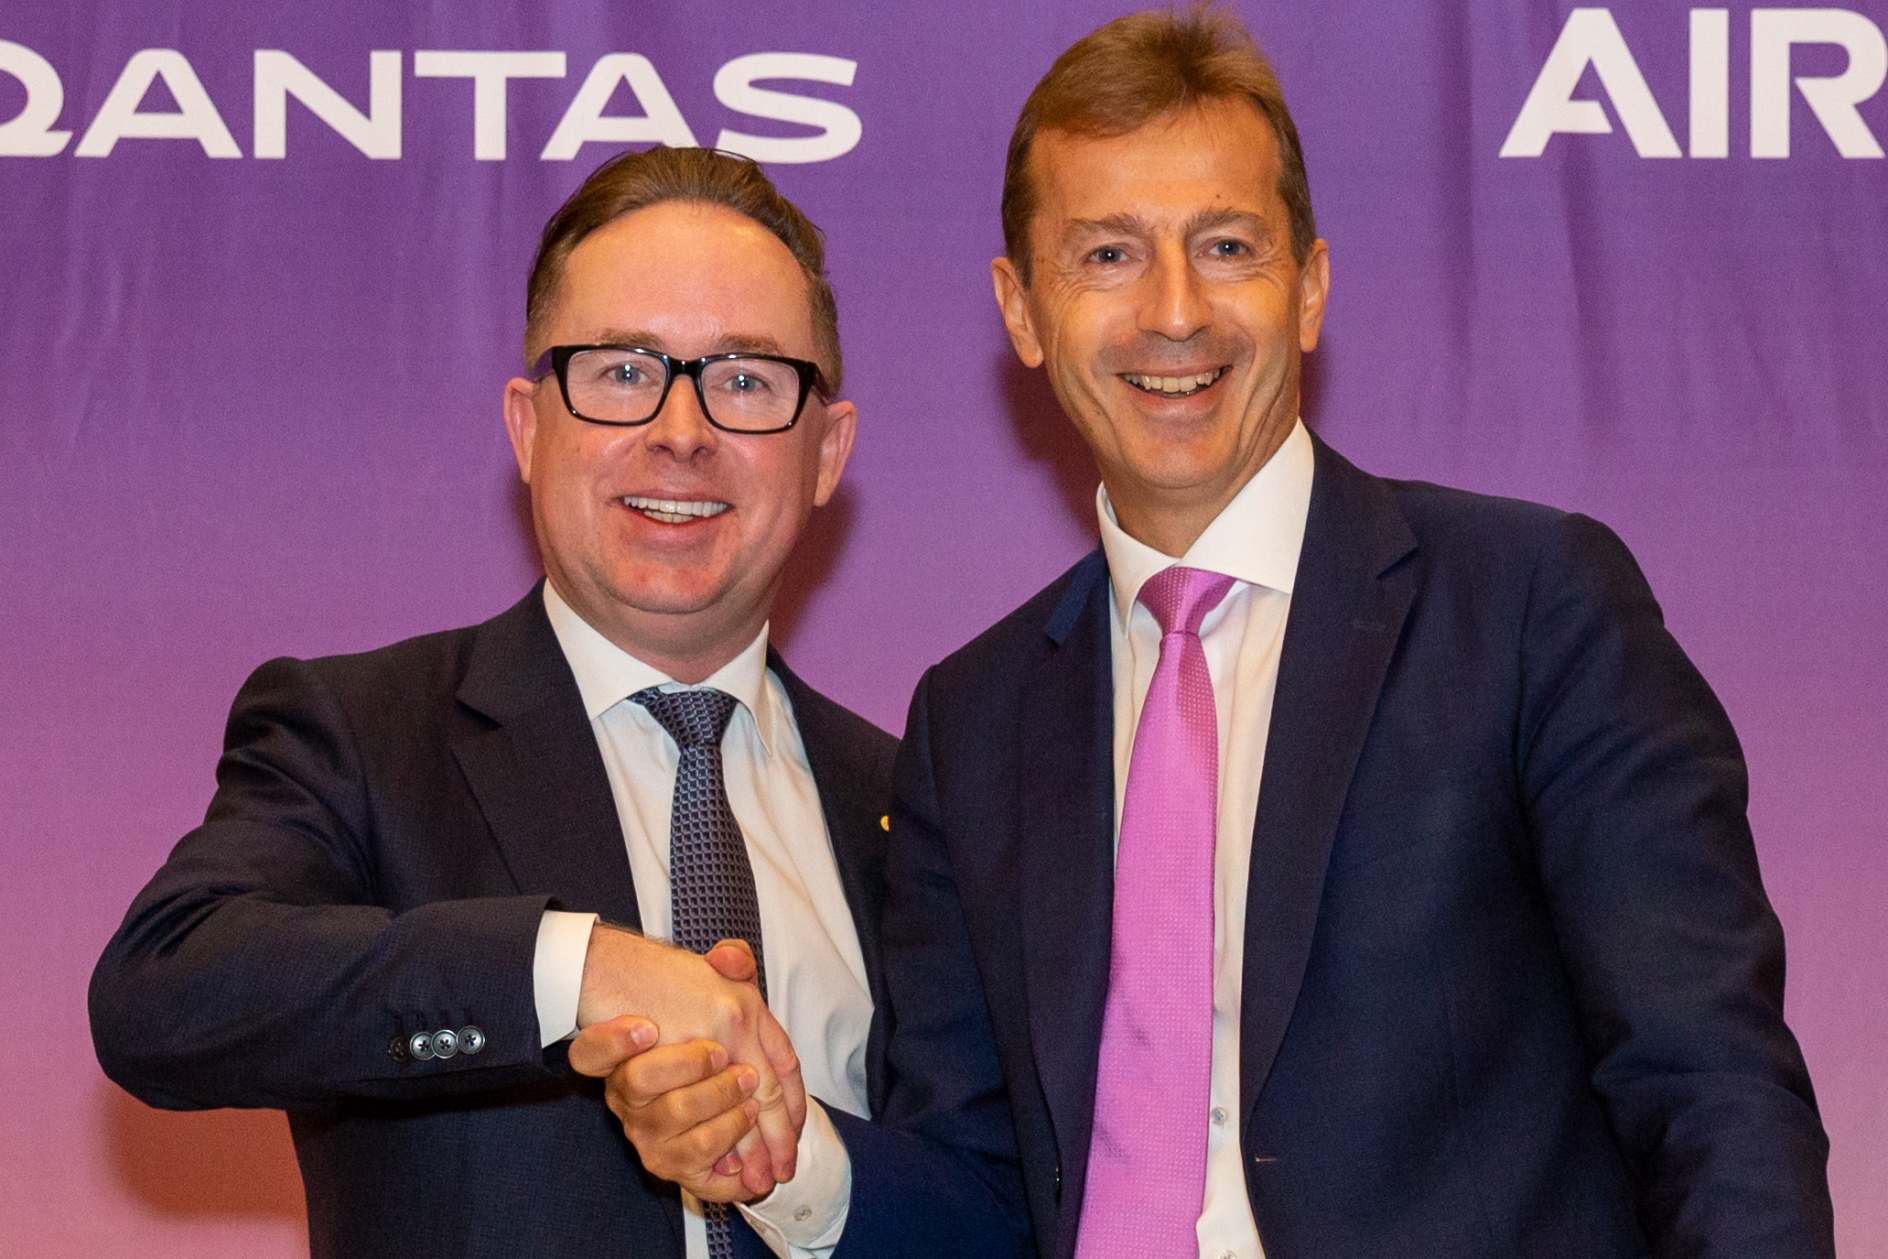 Qantas Group CEO, Alan Joyce (left) with Airbus CEO, Guillaume Faury. Click to enlarge.